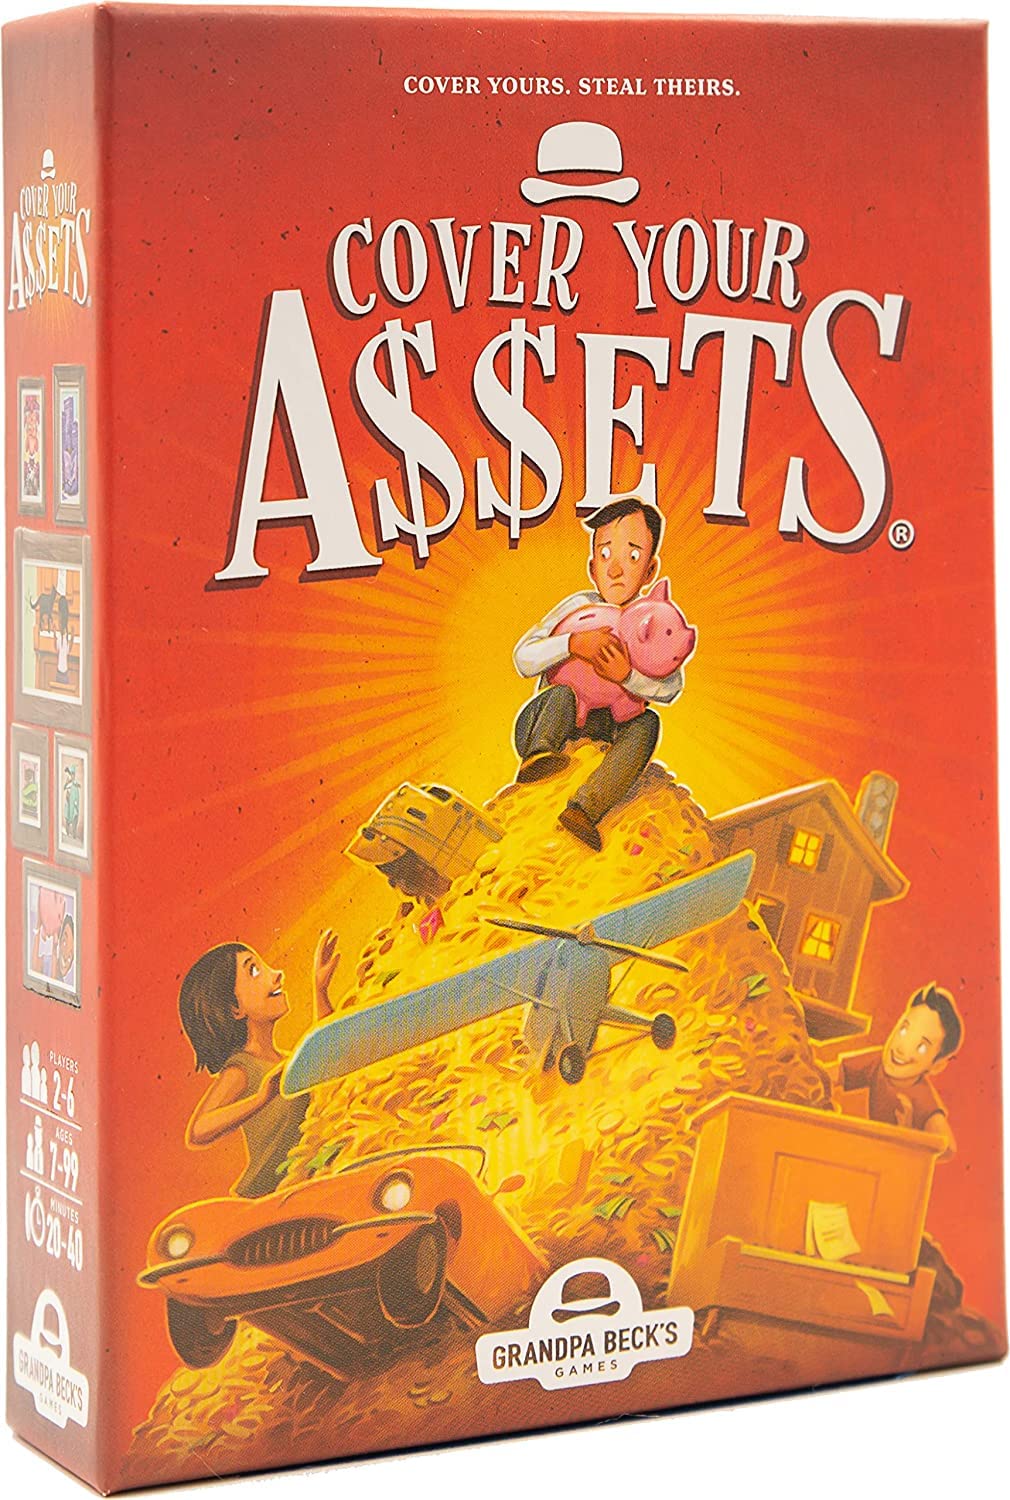 Grandpa Beck's Games Cover Your Assets